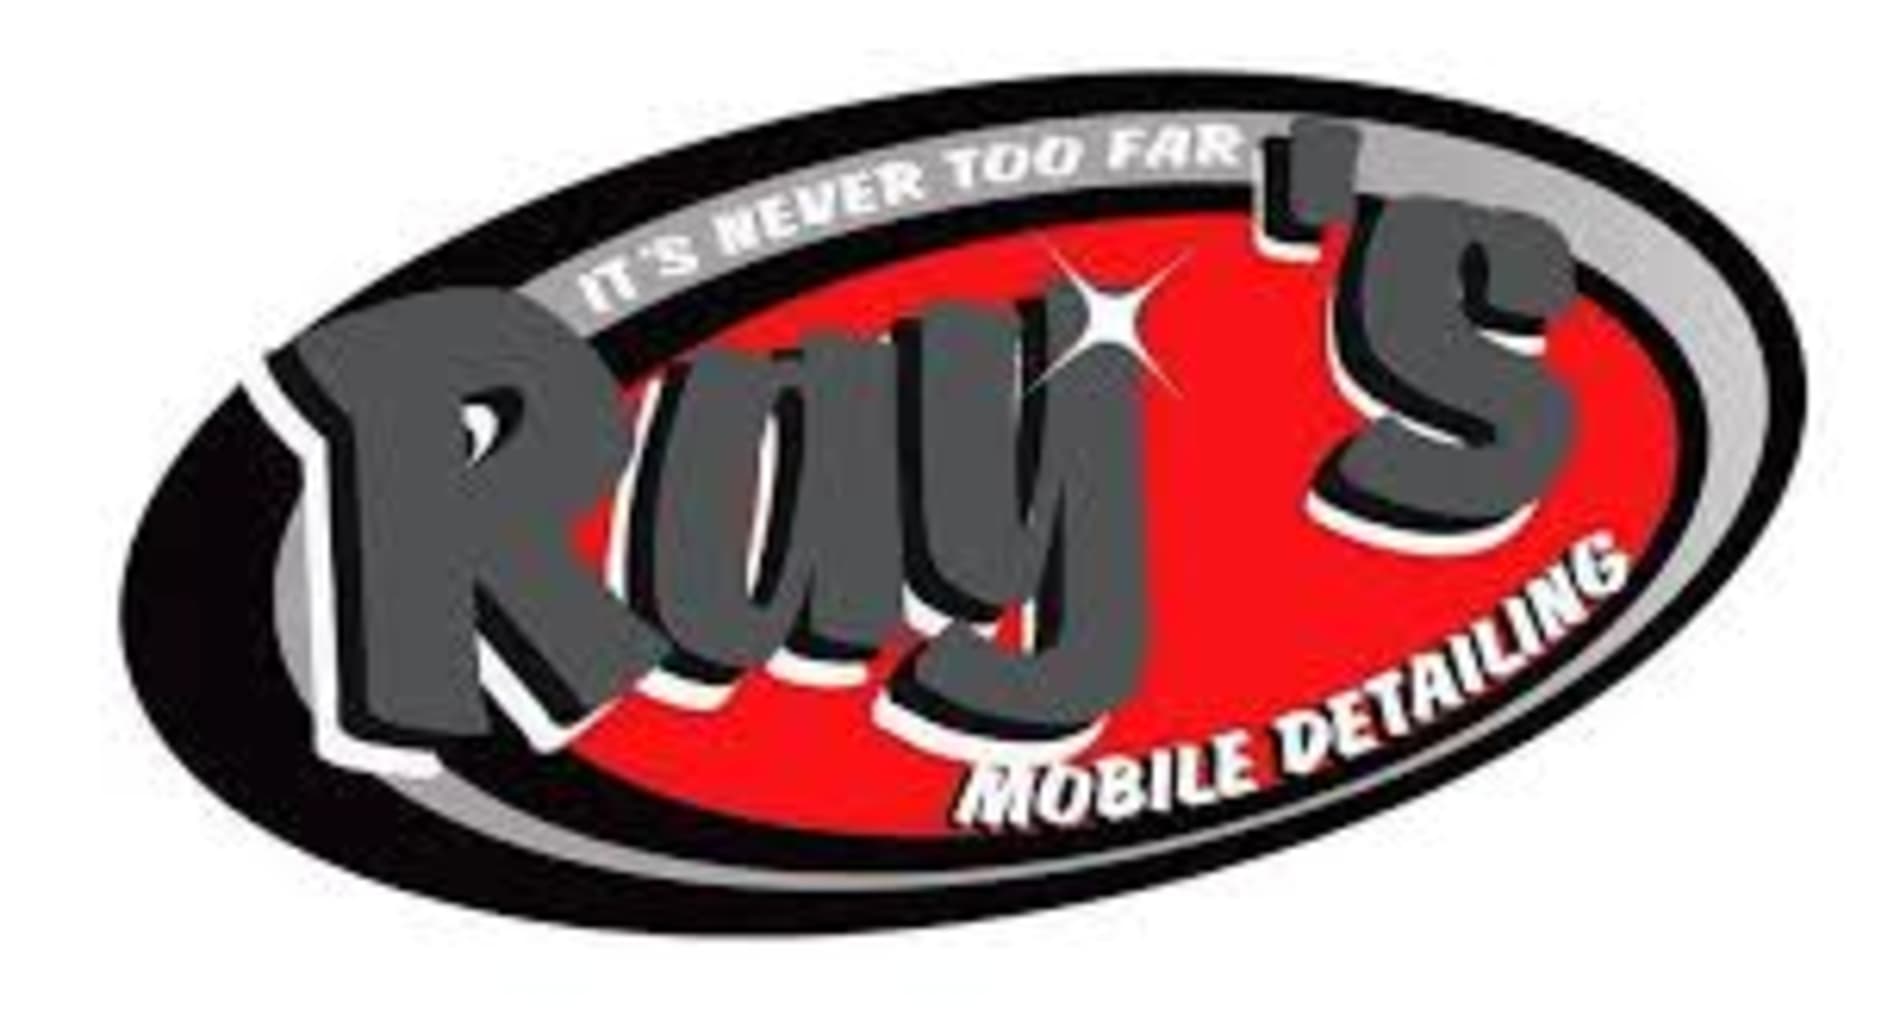 Rays Cleaning Services and Mobile Detailing